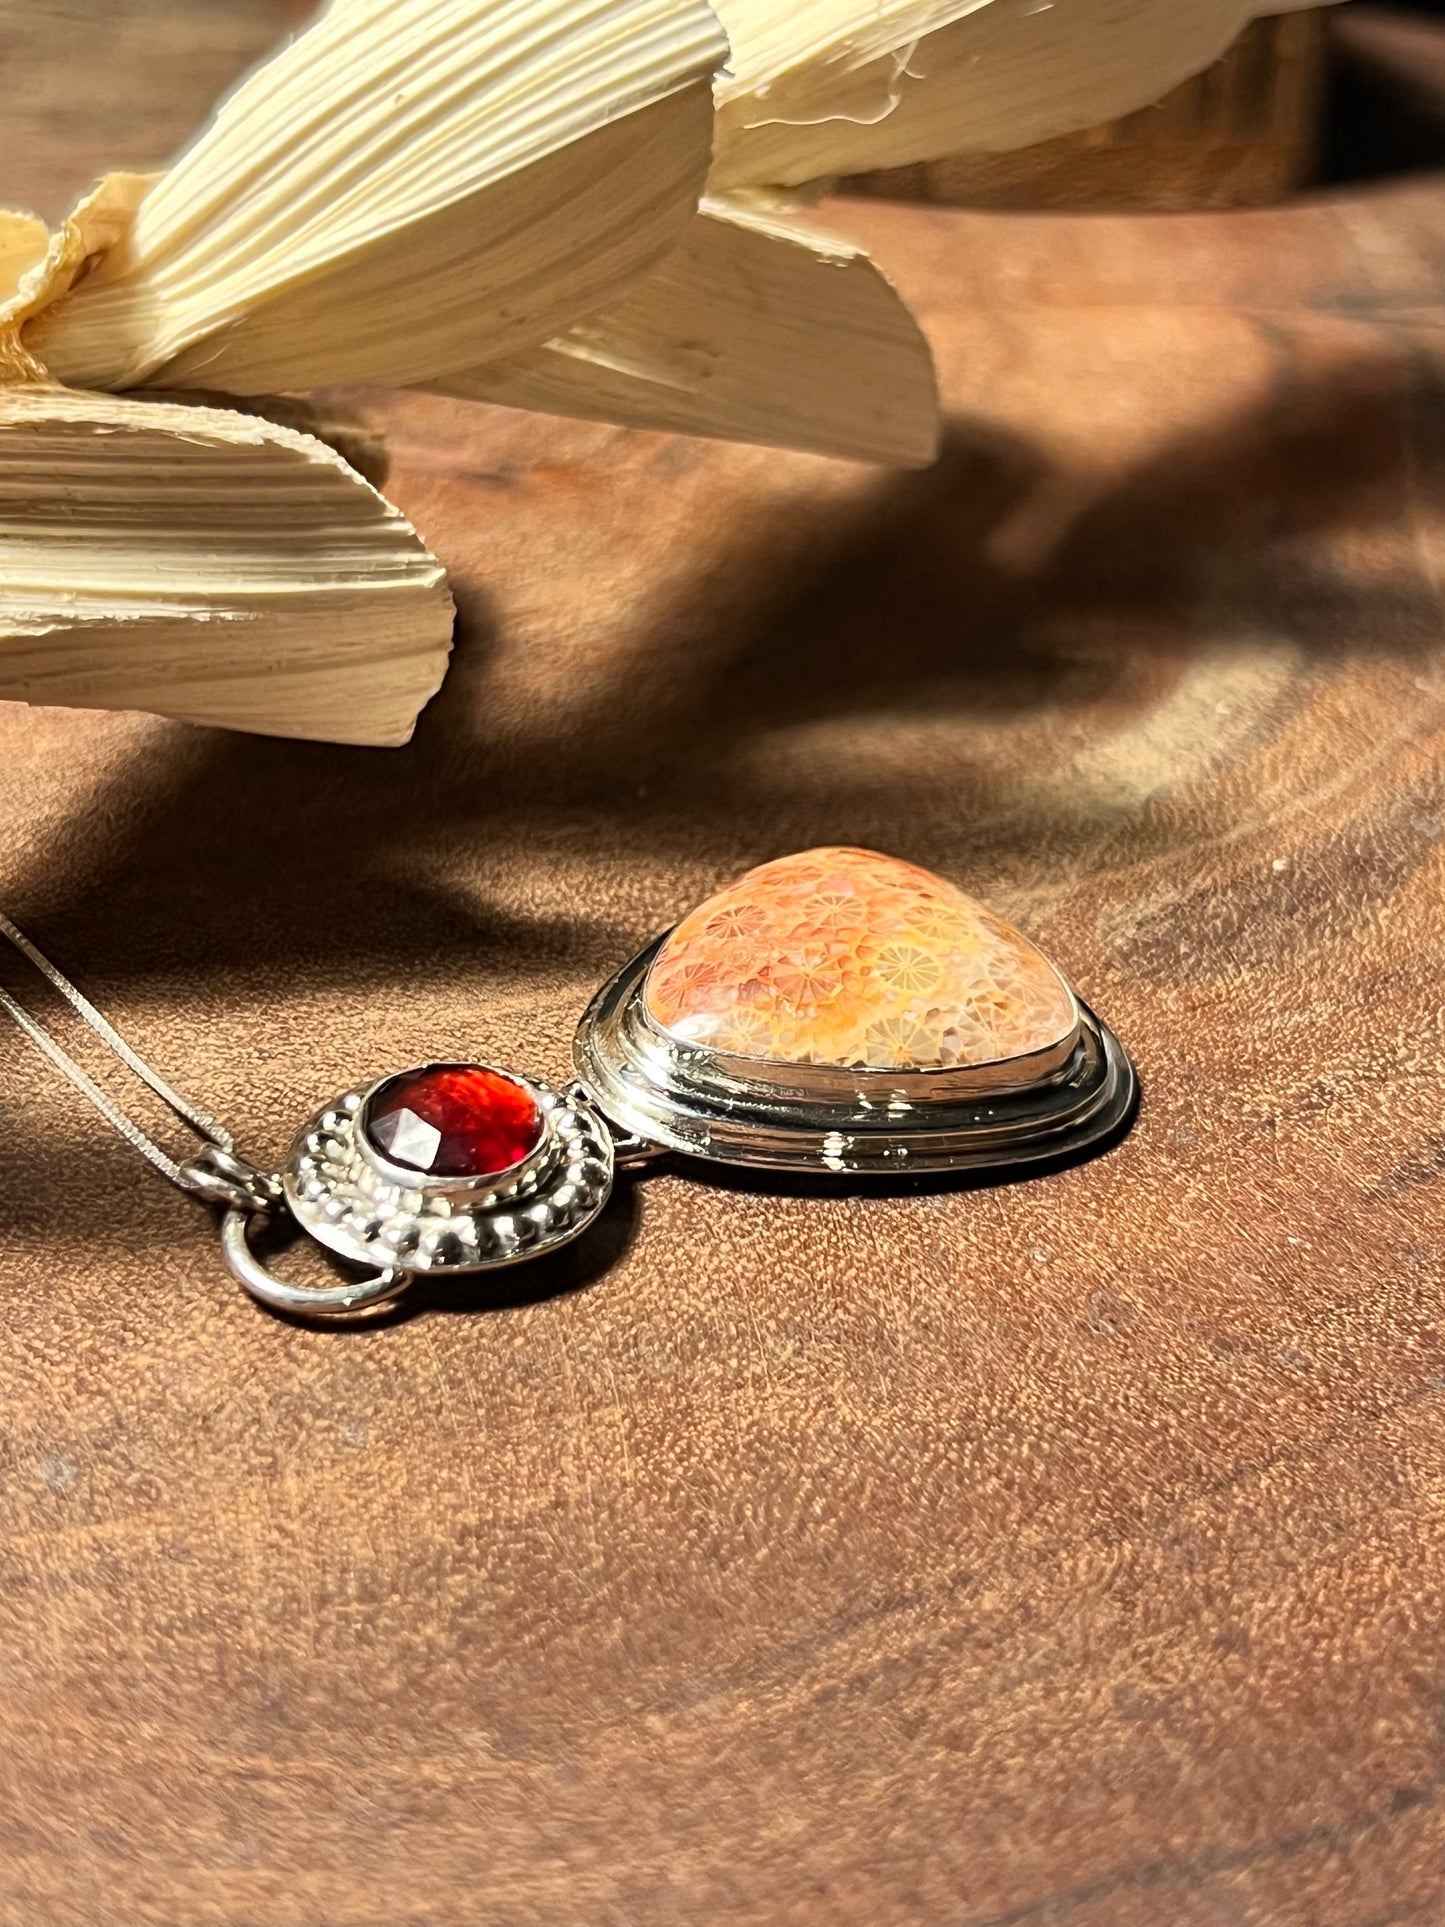 Fossilized Coral and Garnet Sterling Silver Pendant